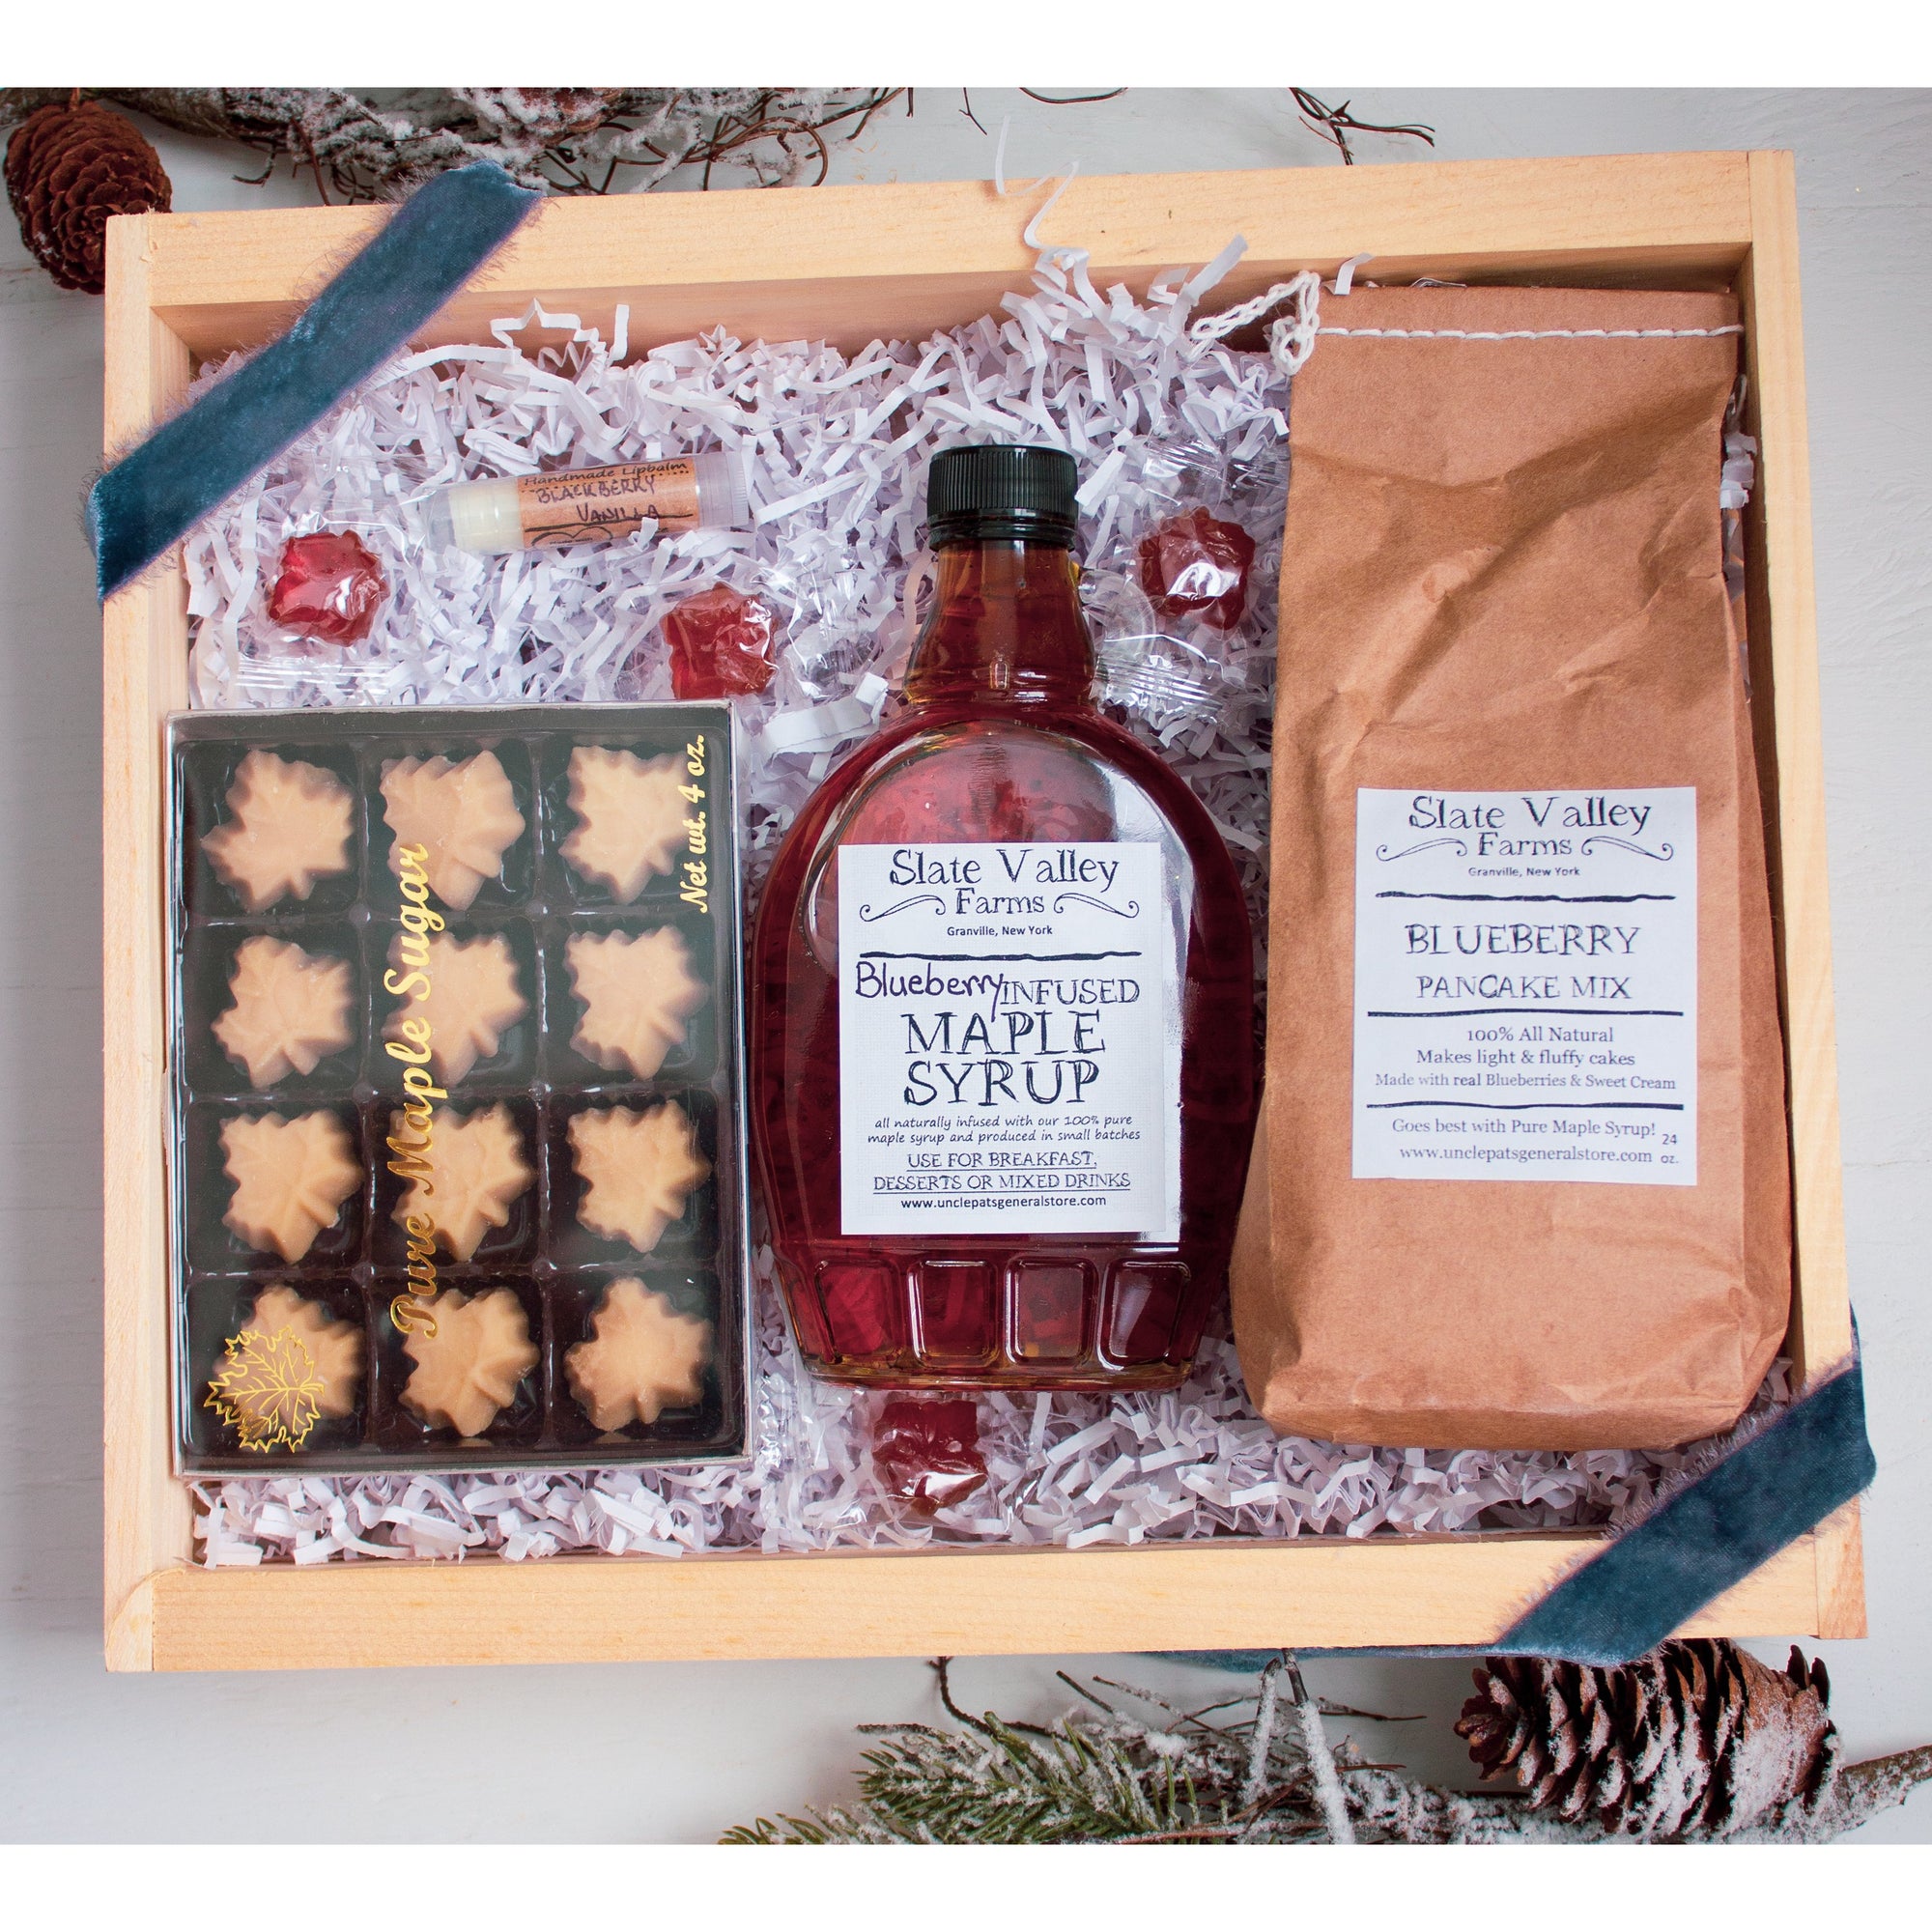 BLUEBERRY LOVERS GIFT CRATE